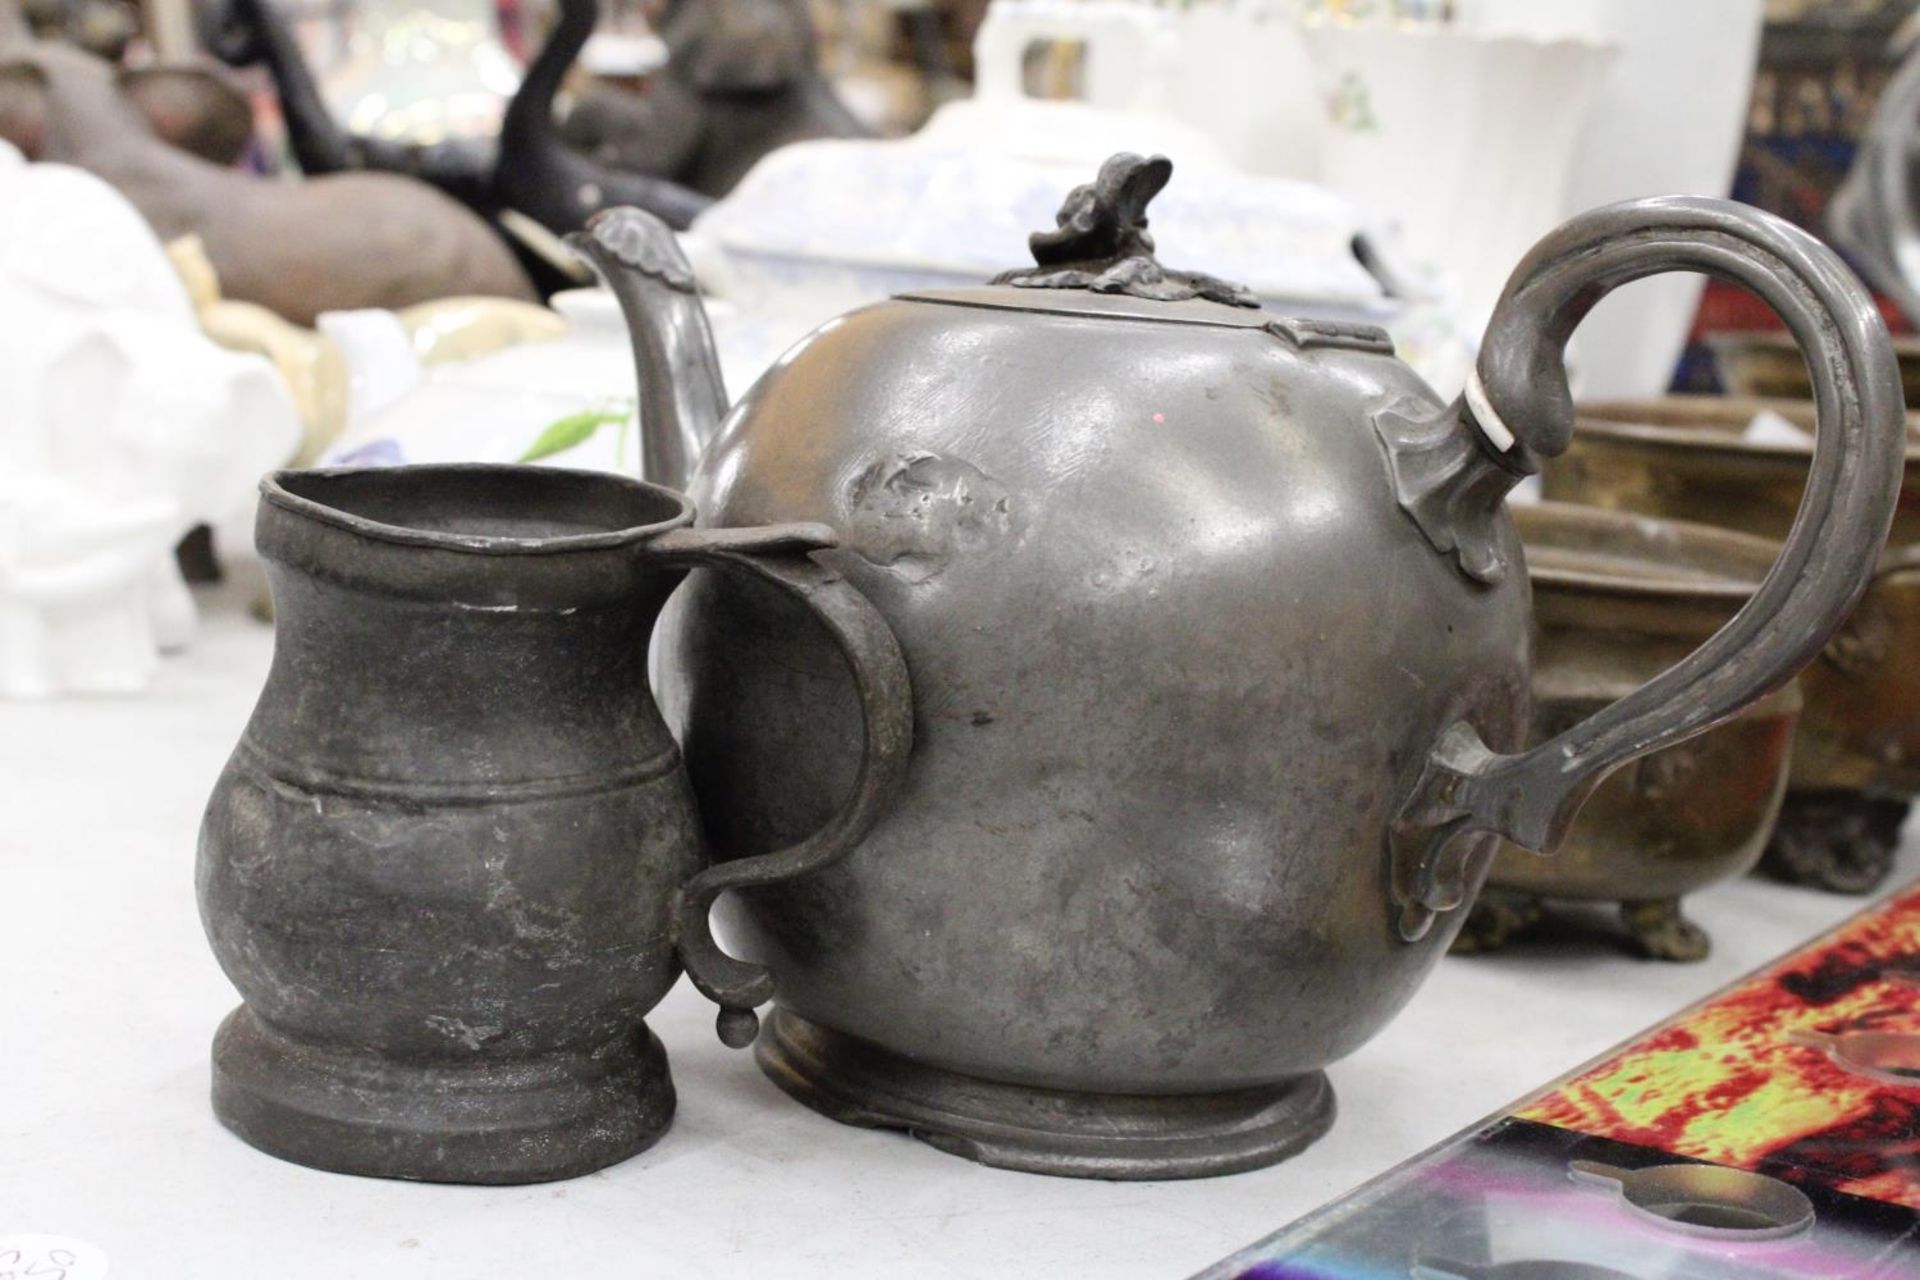 A GEORGIAN PEWTER TEAPOT AND A 14TH CENTURY PEWTER MUG - Image 2 of 5